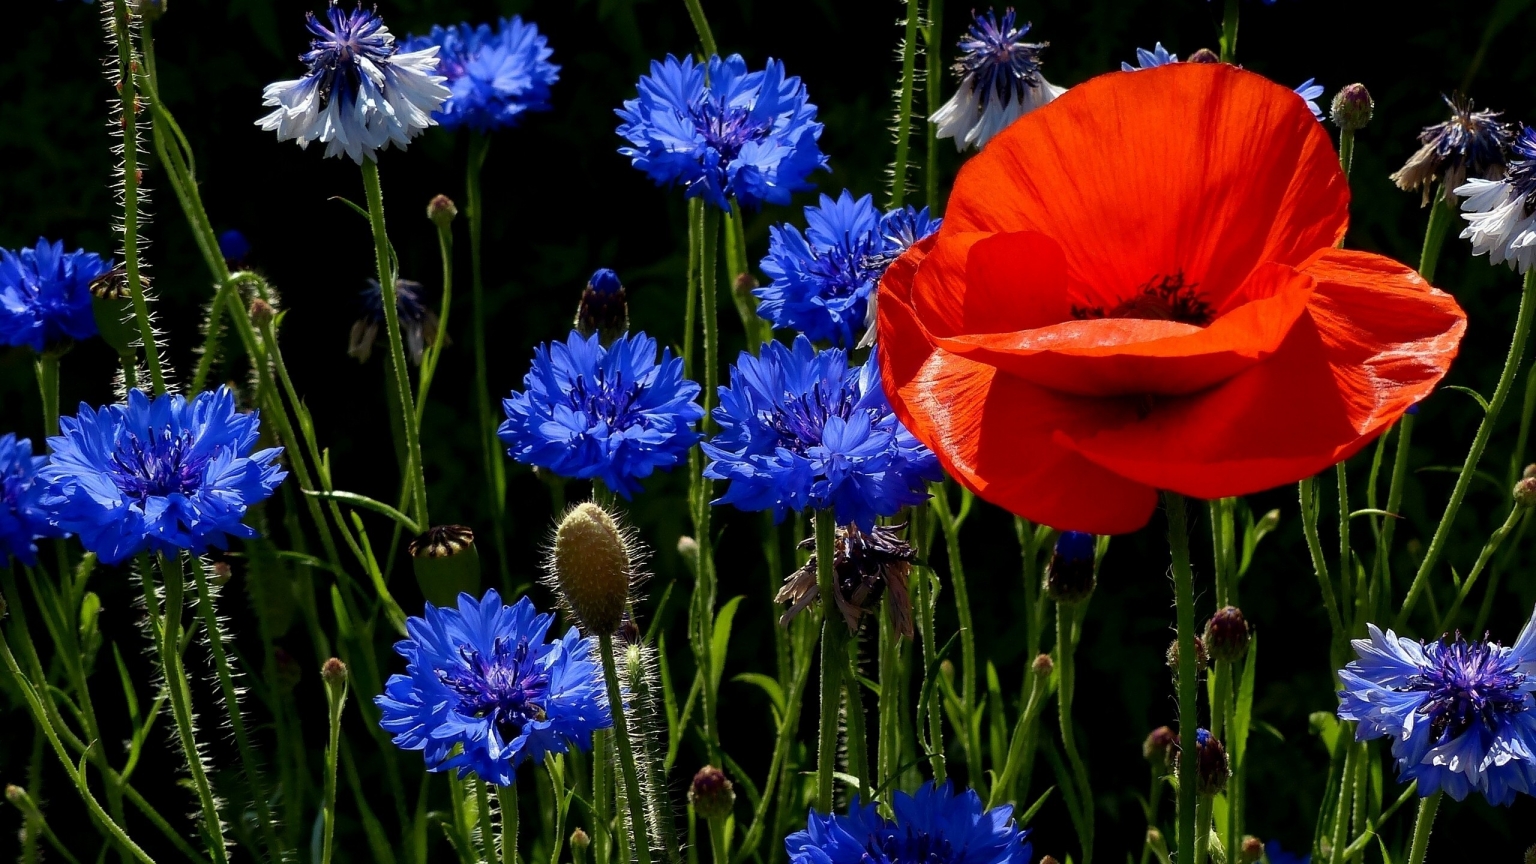 Poppies and Cornflowers for 1536 x 864 HDTV resolution